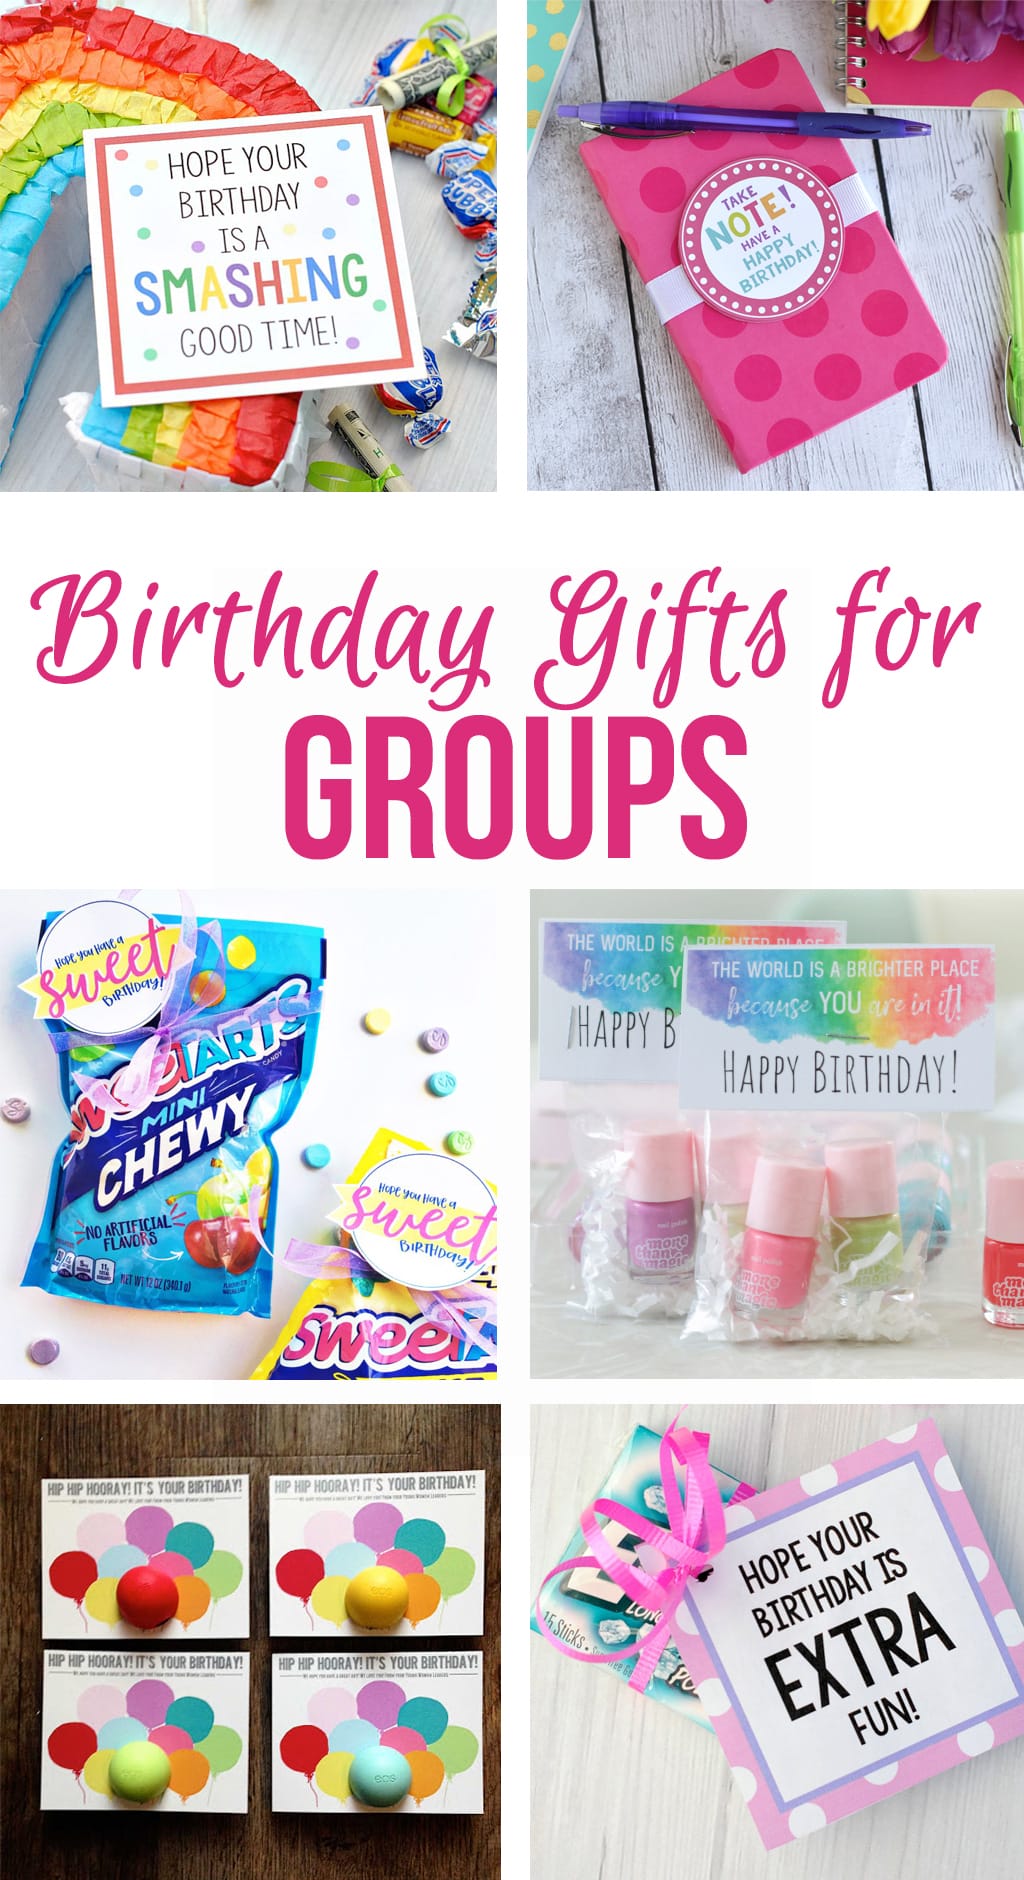 Birthday Gifts for Groups